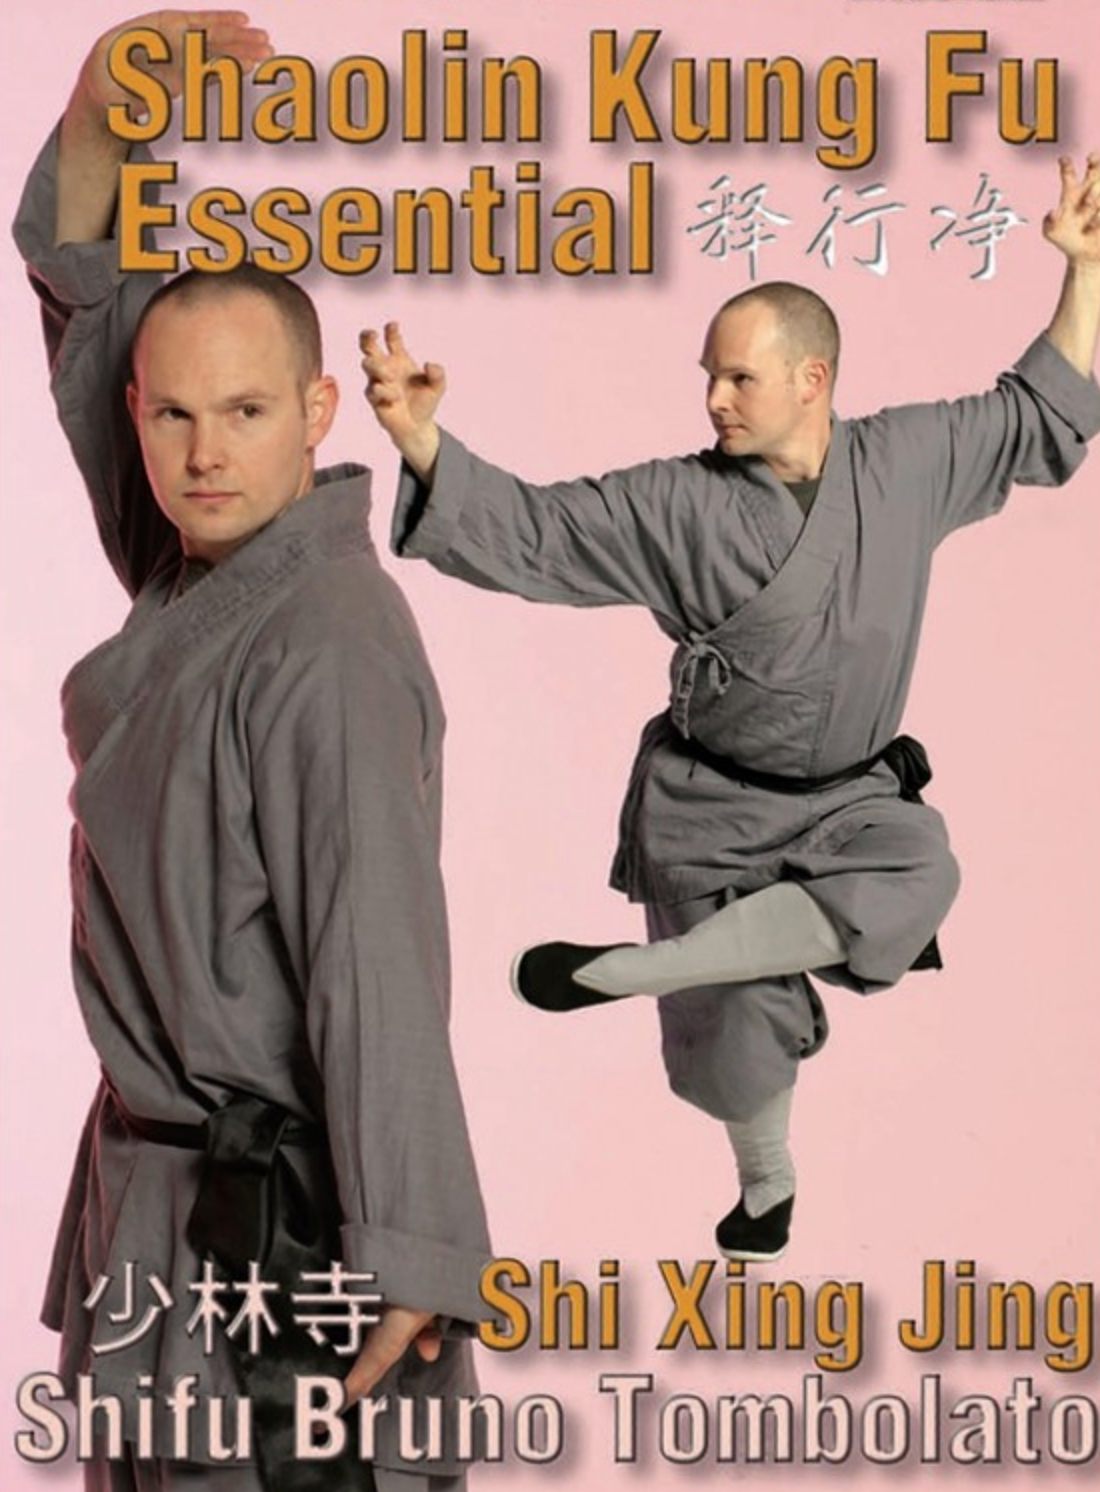 Essential Shaolin Kung Fu DVD by Bruno Tombolato - Budovideos Inc